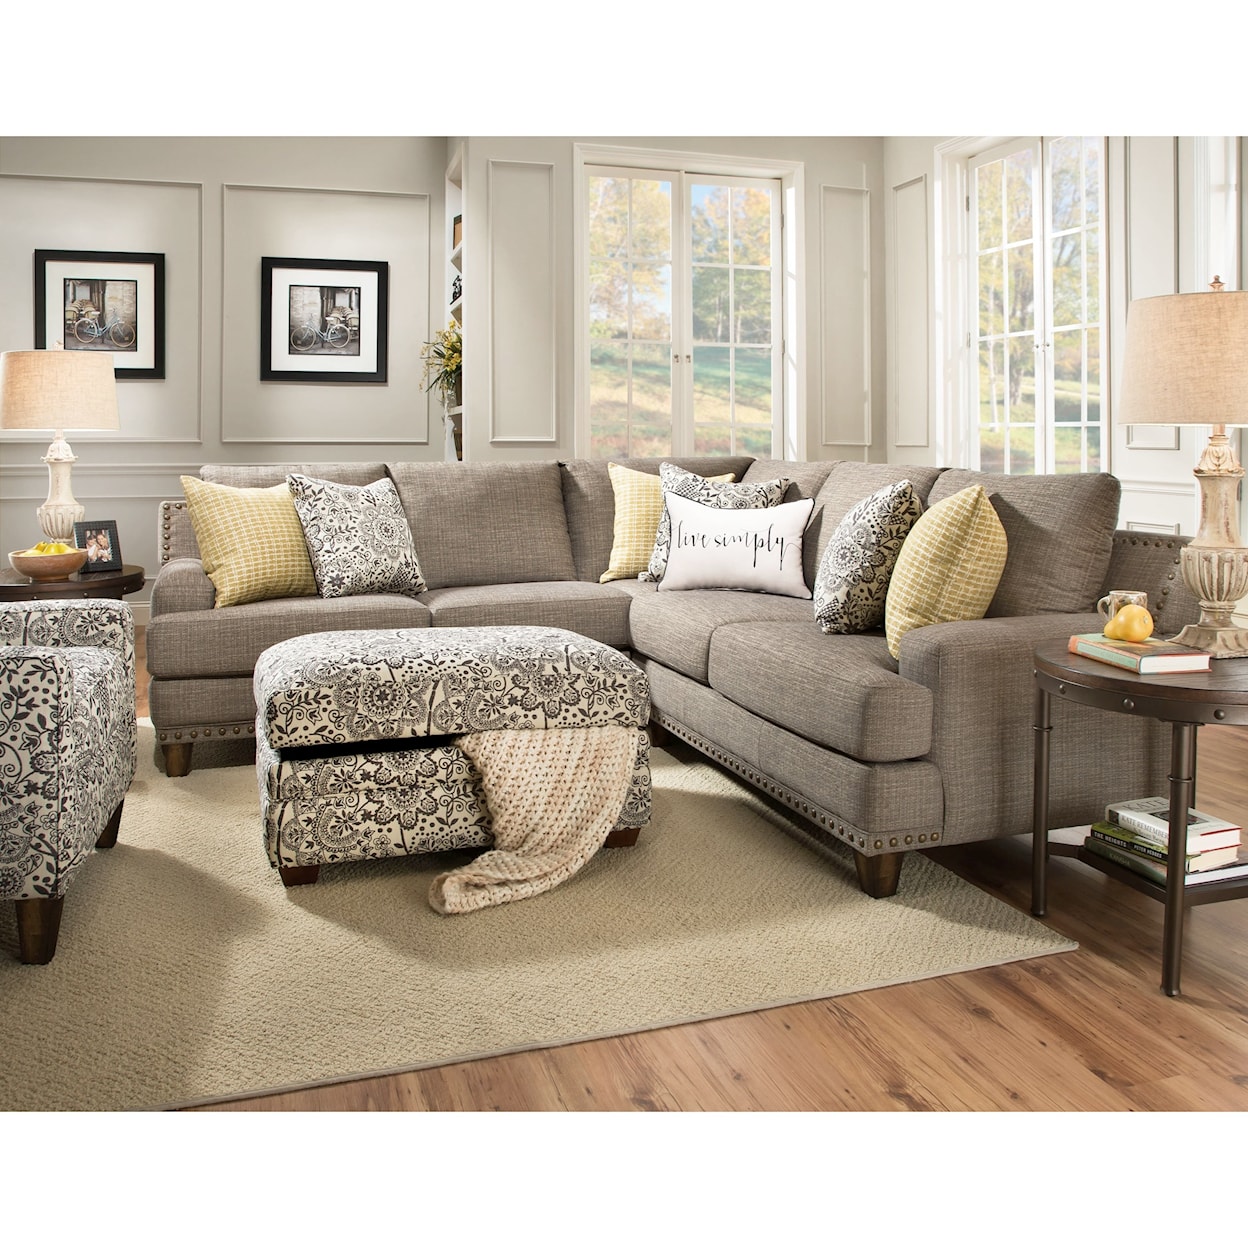 Franklin 864 Julienne Sectional Sofa with Four Seats